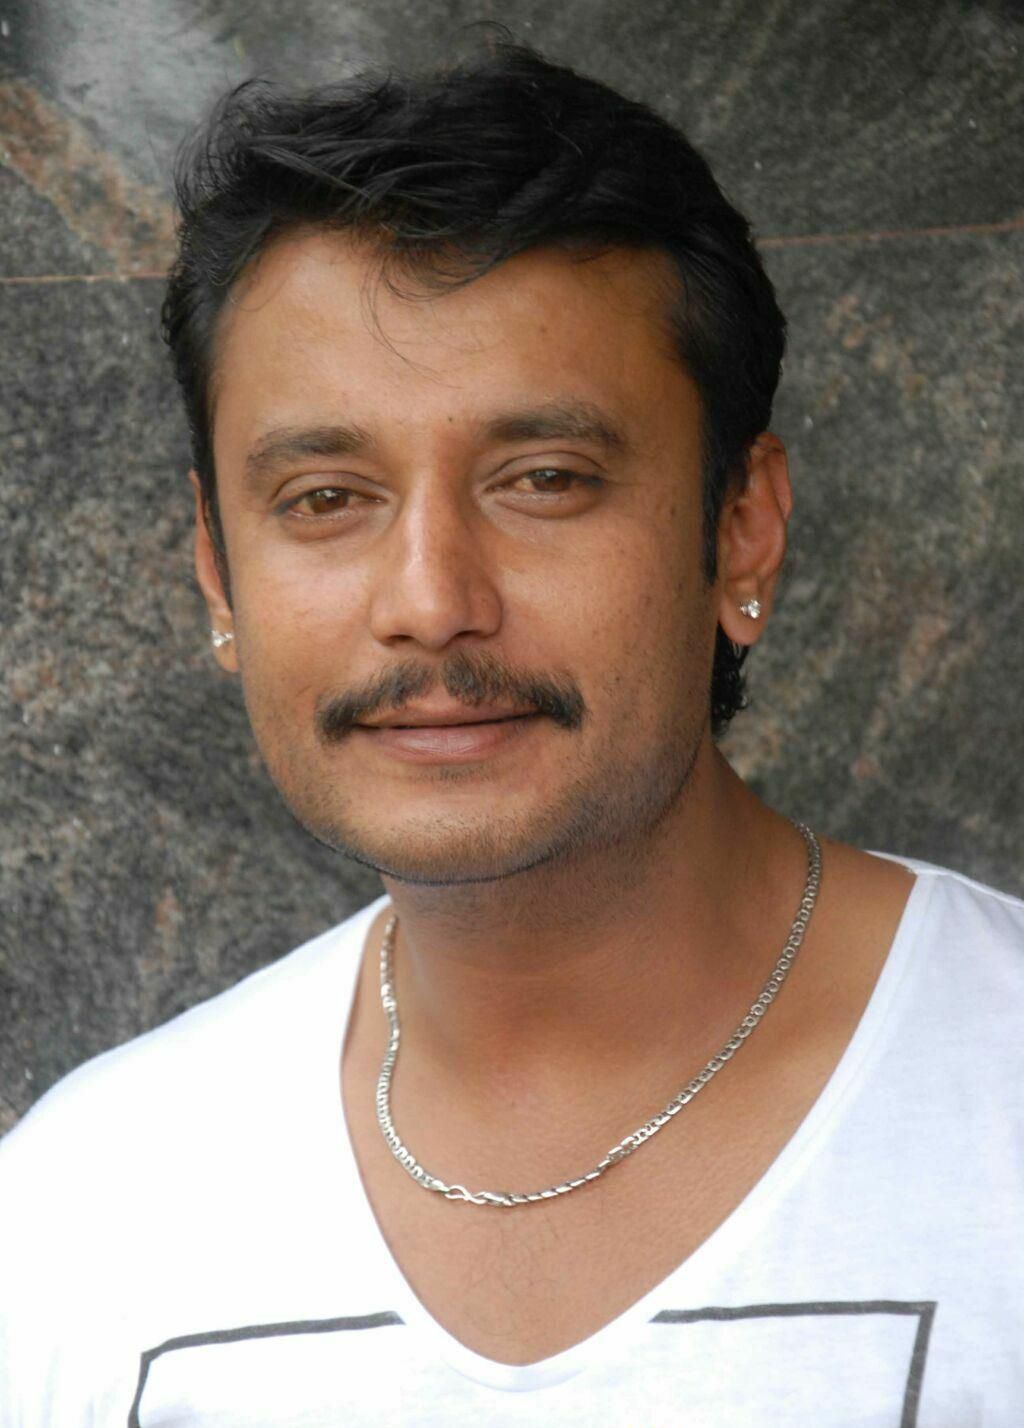 Darshan fined for disobeying traffic rules